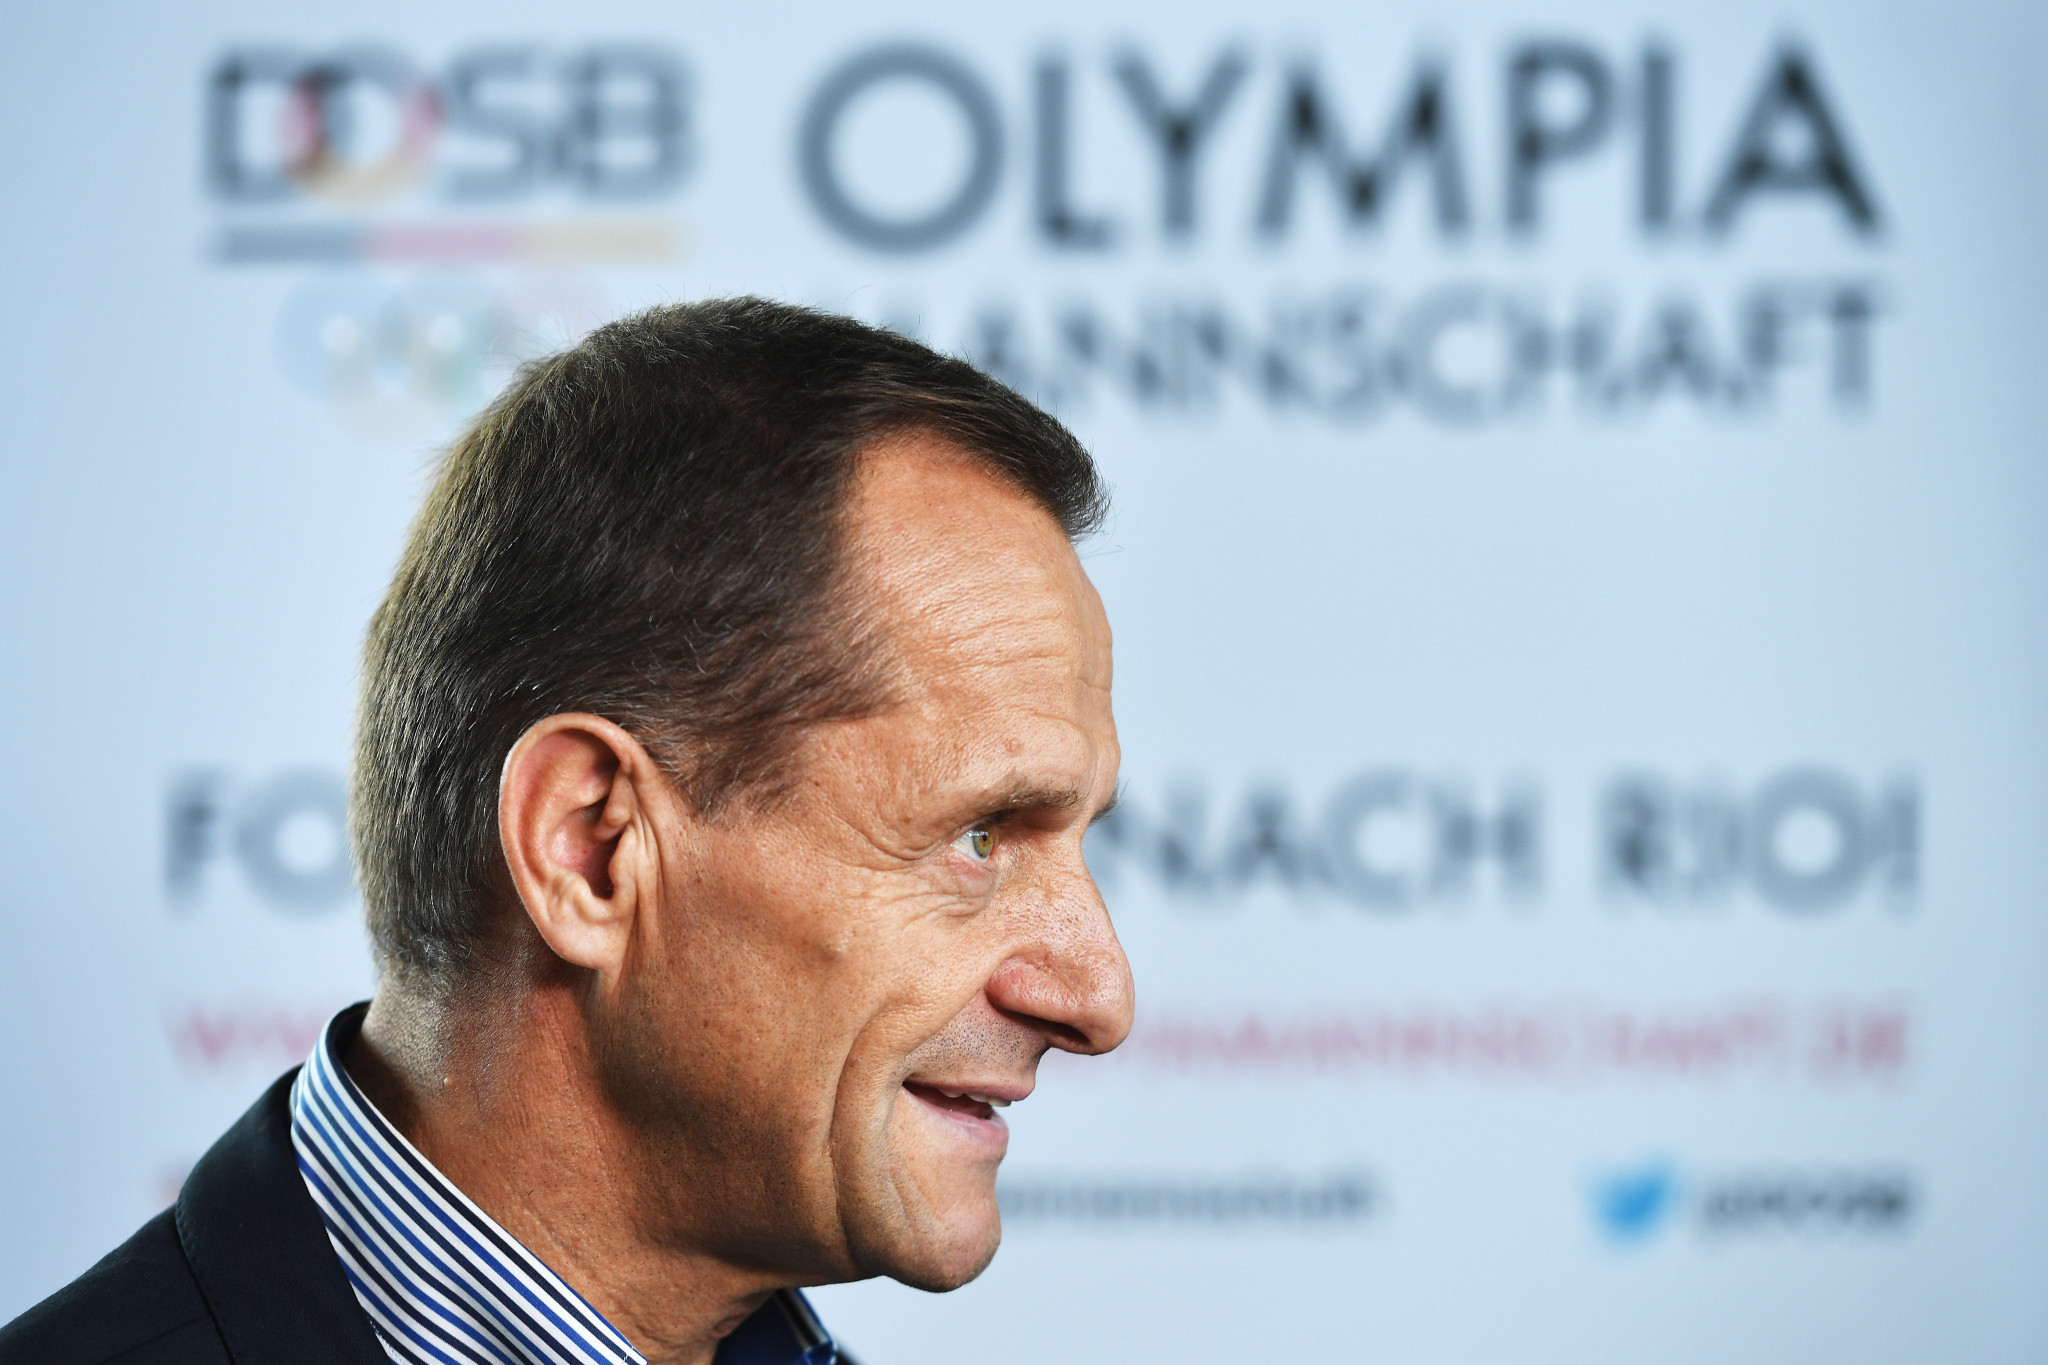 DOSB President would understand if German athletes did not compete at Pyeongchang 2018